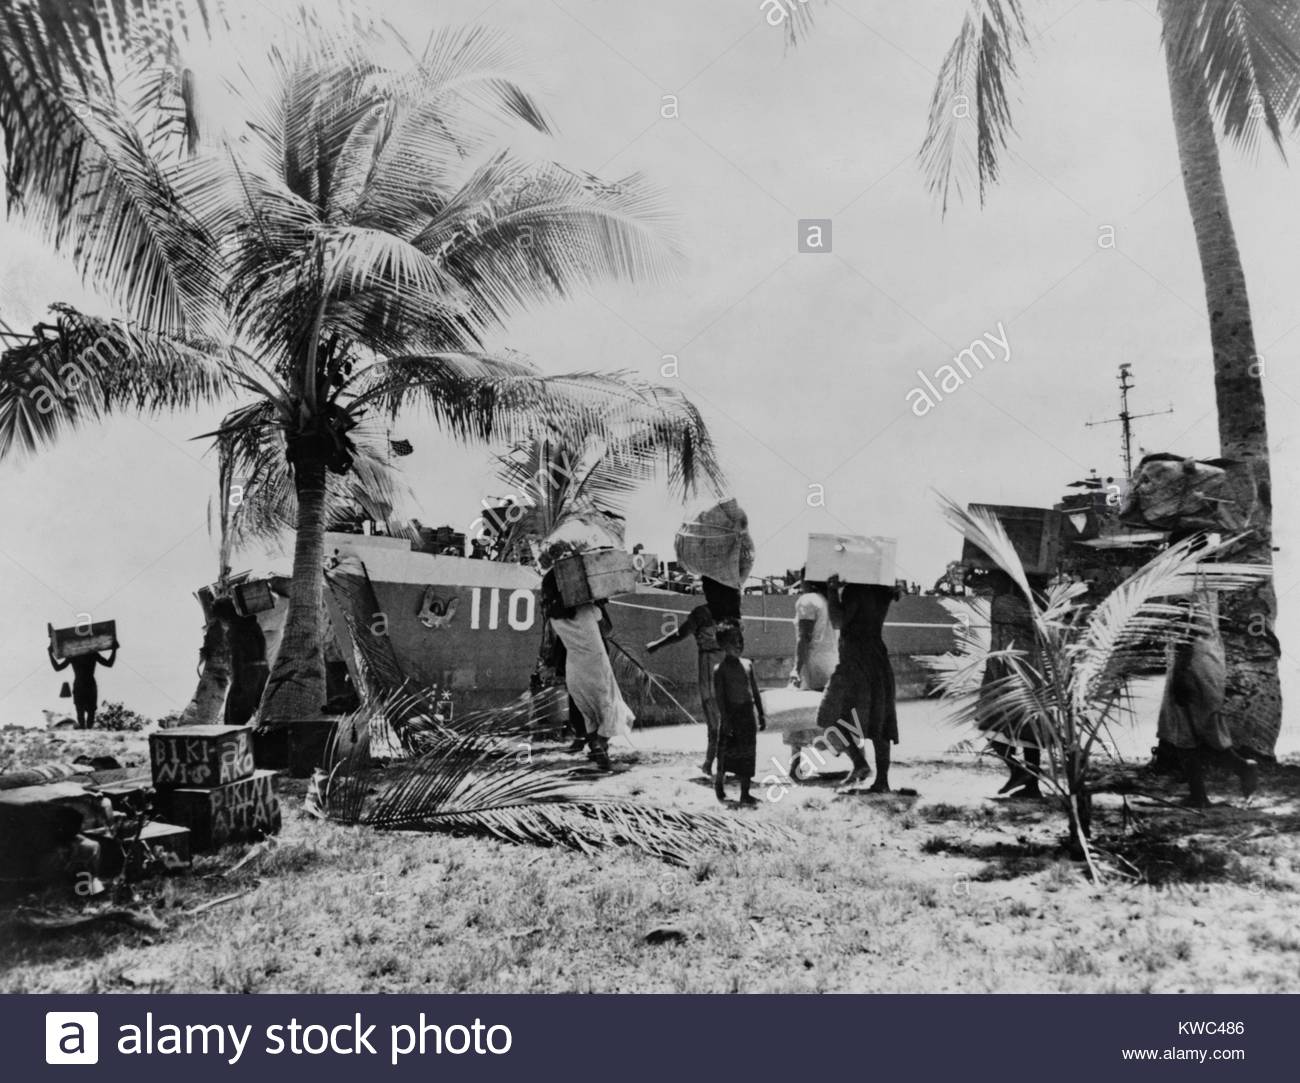 People of Bikini Atoll carry their possessions to ships as part of forced relocation